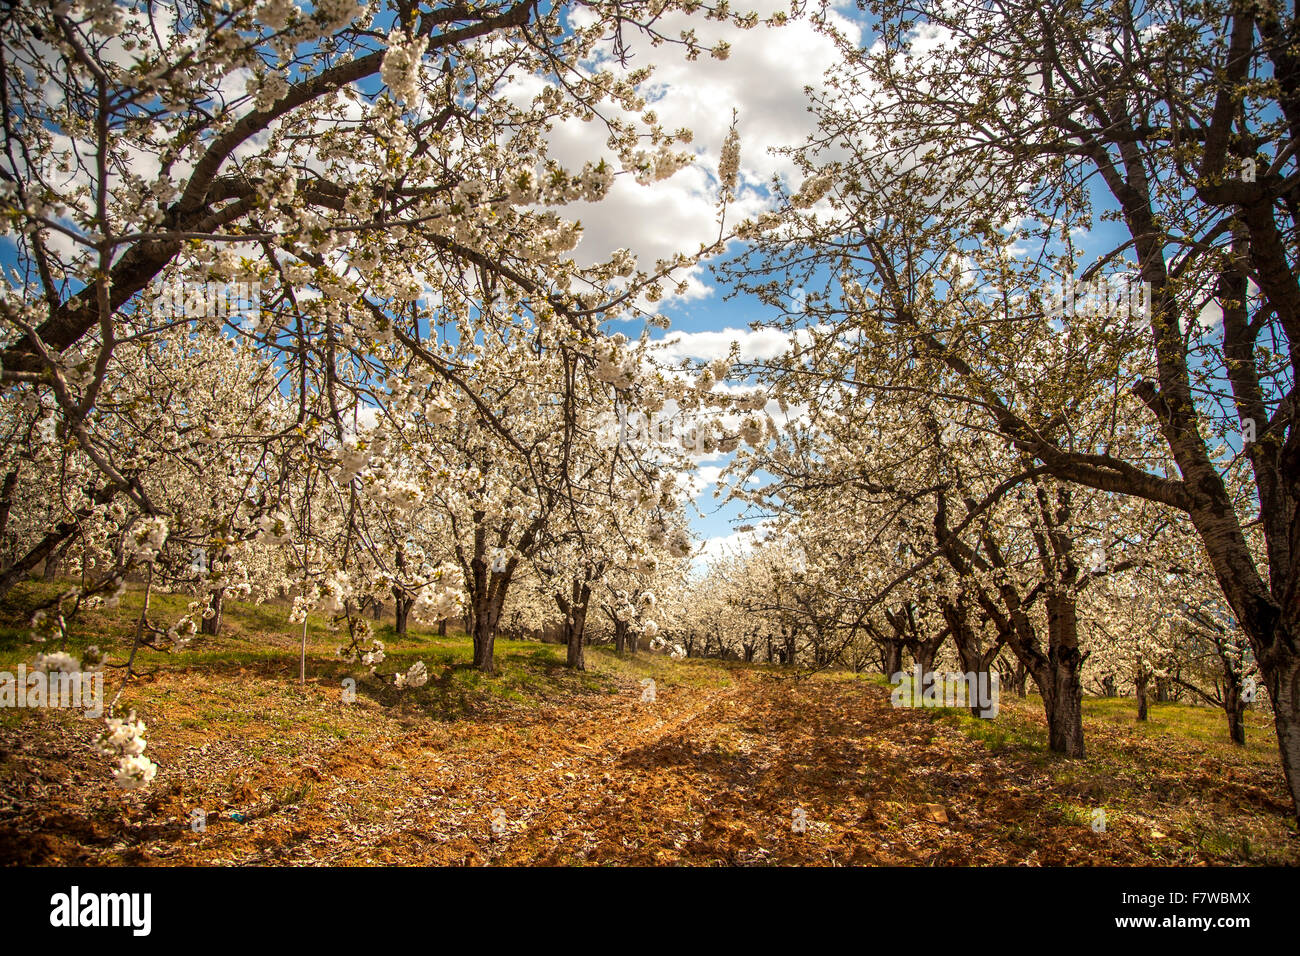 Cherry garden with a lot of trees with blossoms in a sunny spring day. Stock Photo